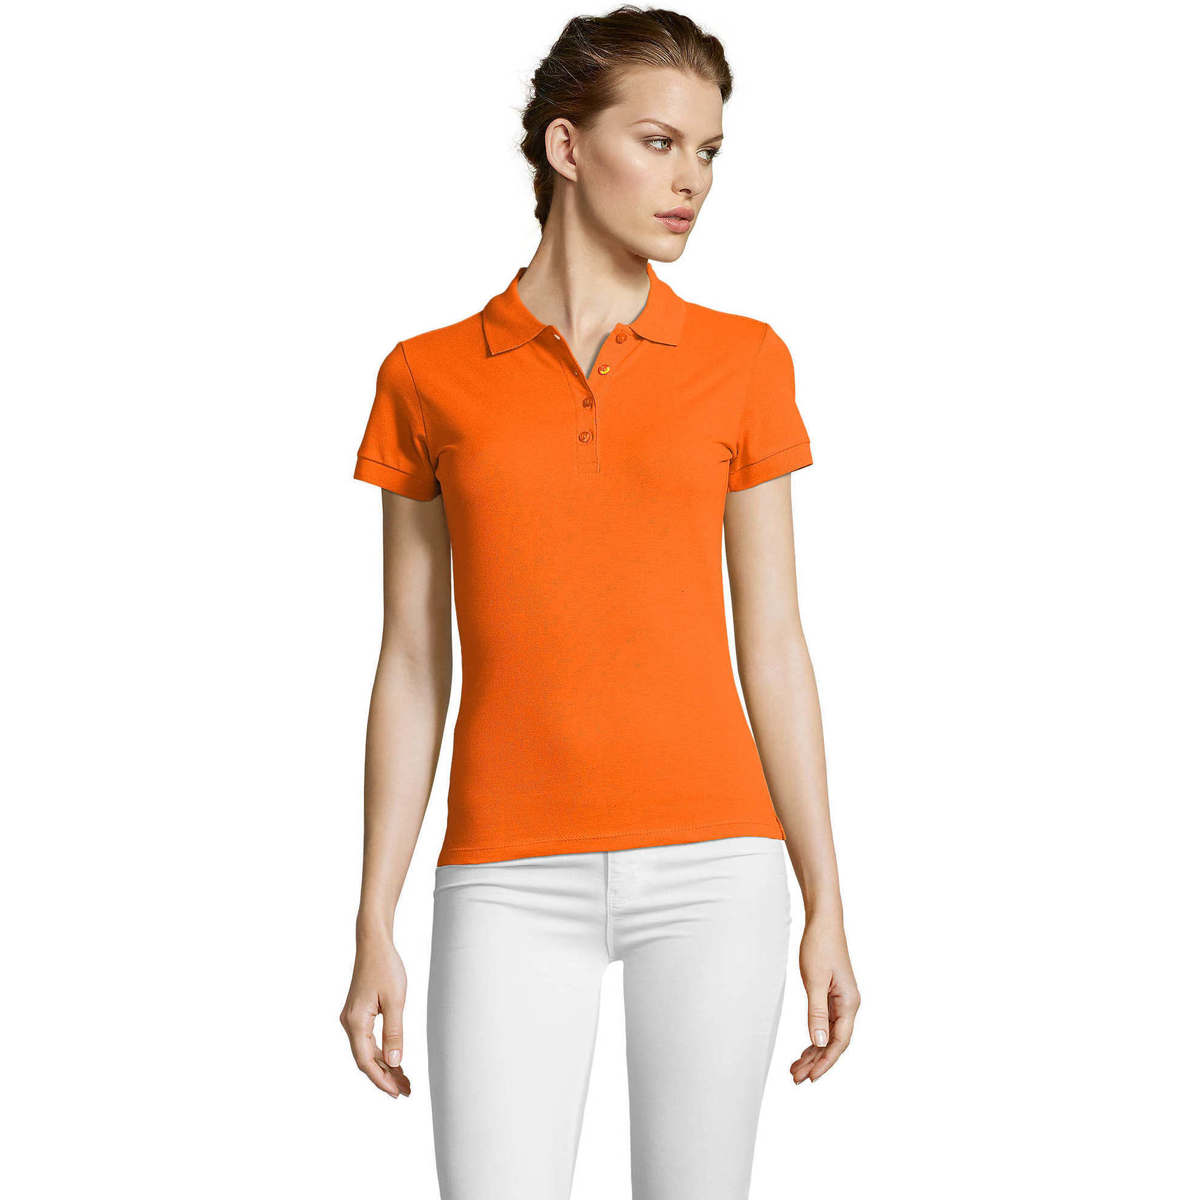 Textil Mulher polo-shirts women belts office-accessories PEOPLE POLO MUJER Laranja